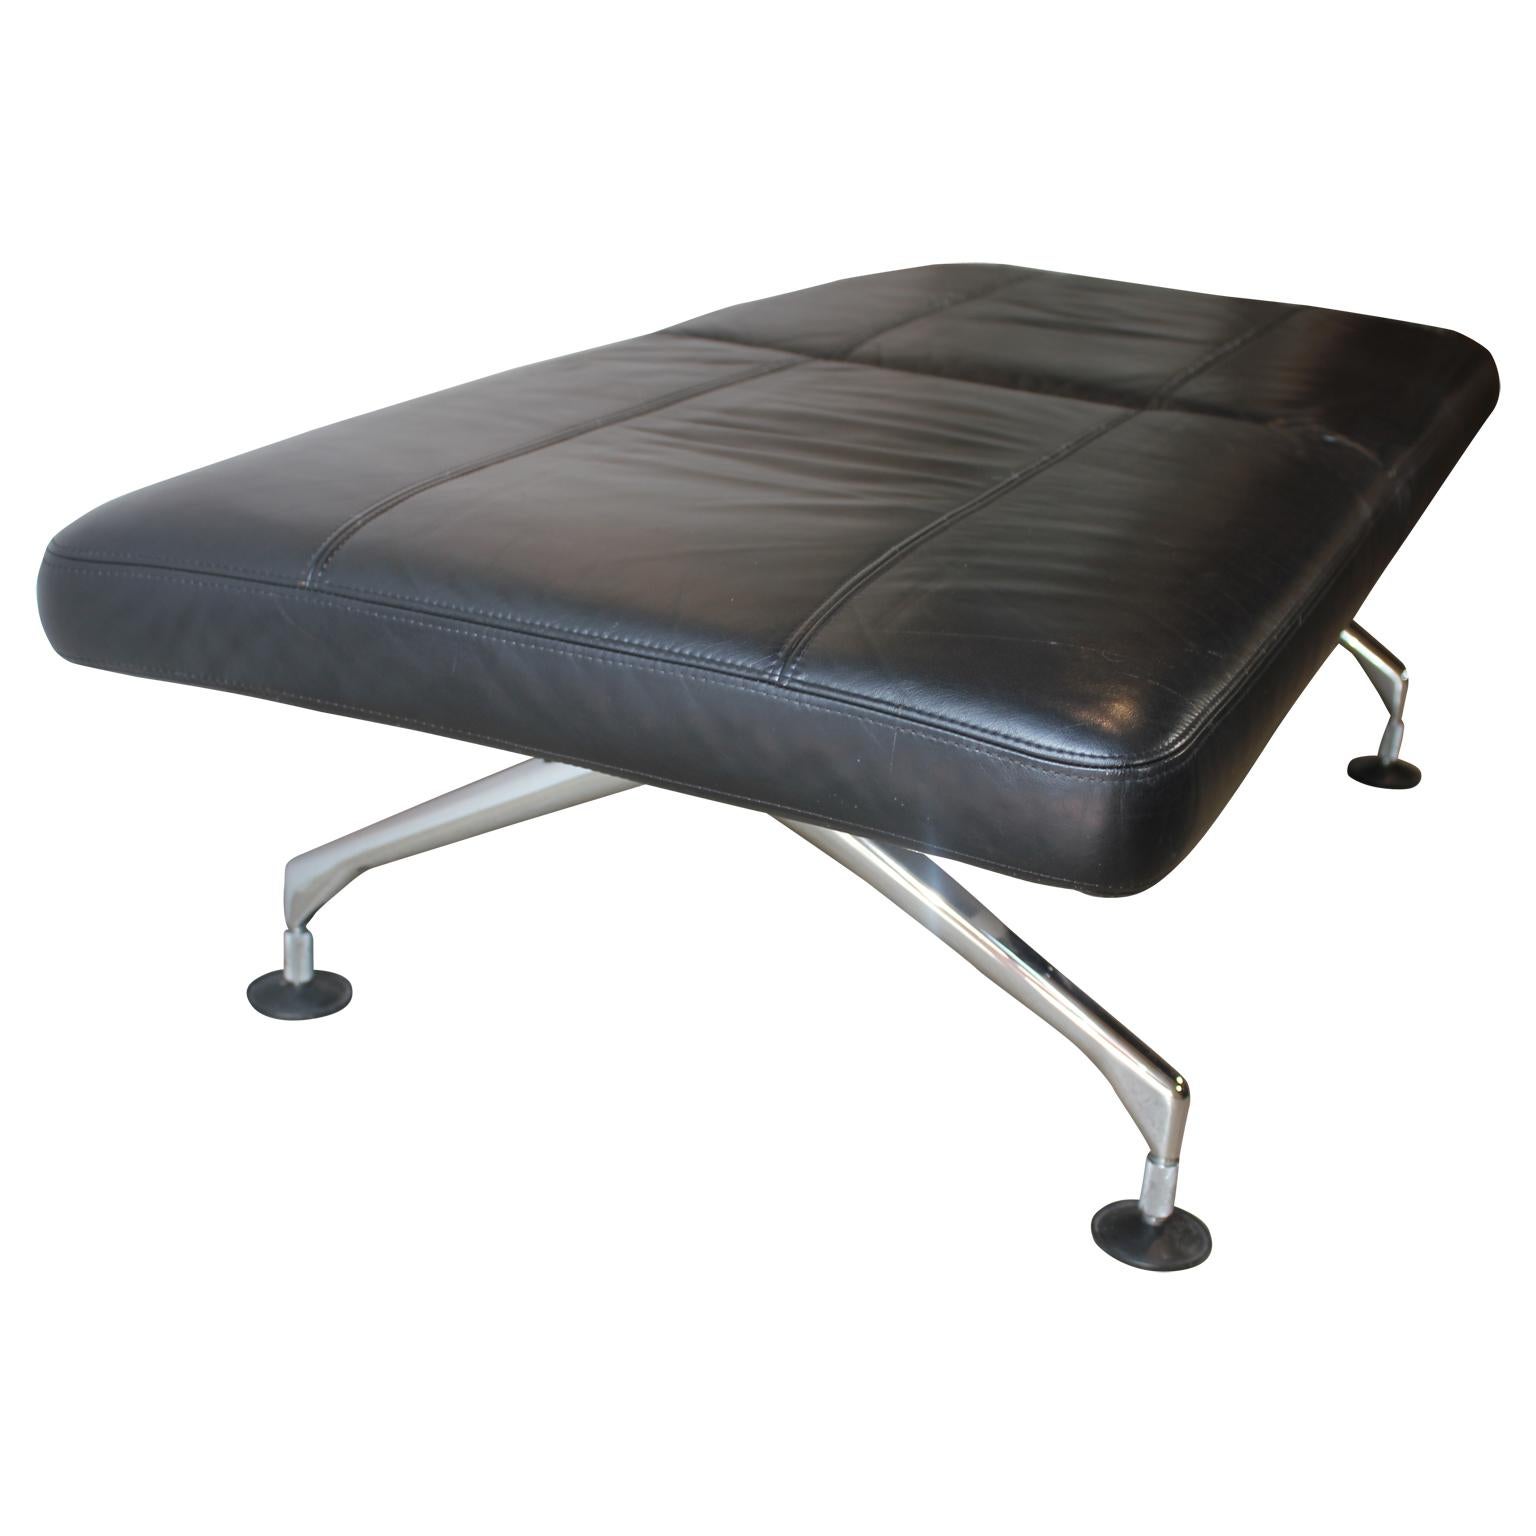 Dutch Modern Black Leather Area Bench by Antonio Citterio for Vitra